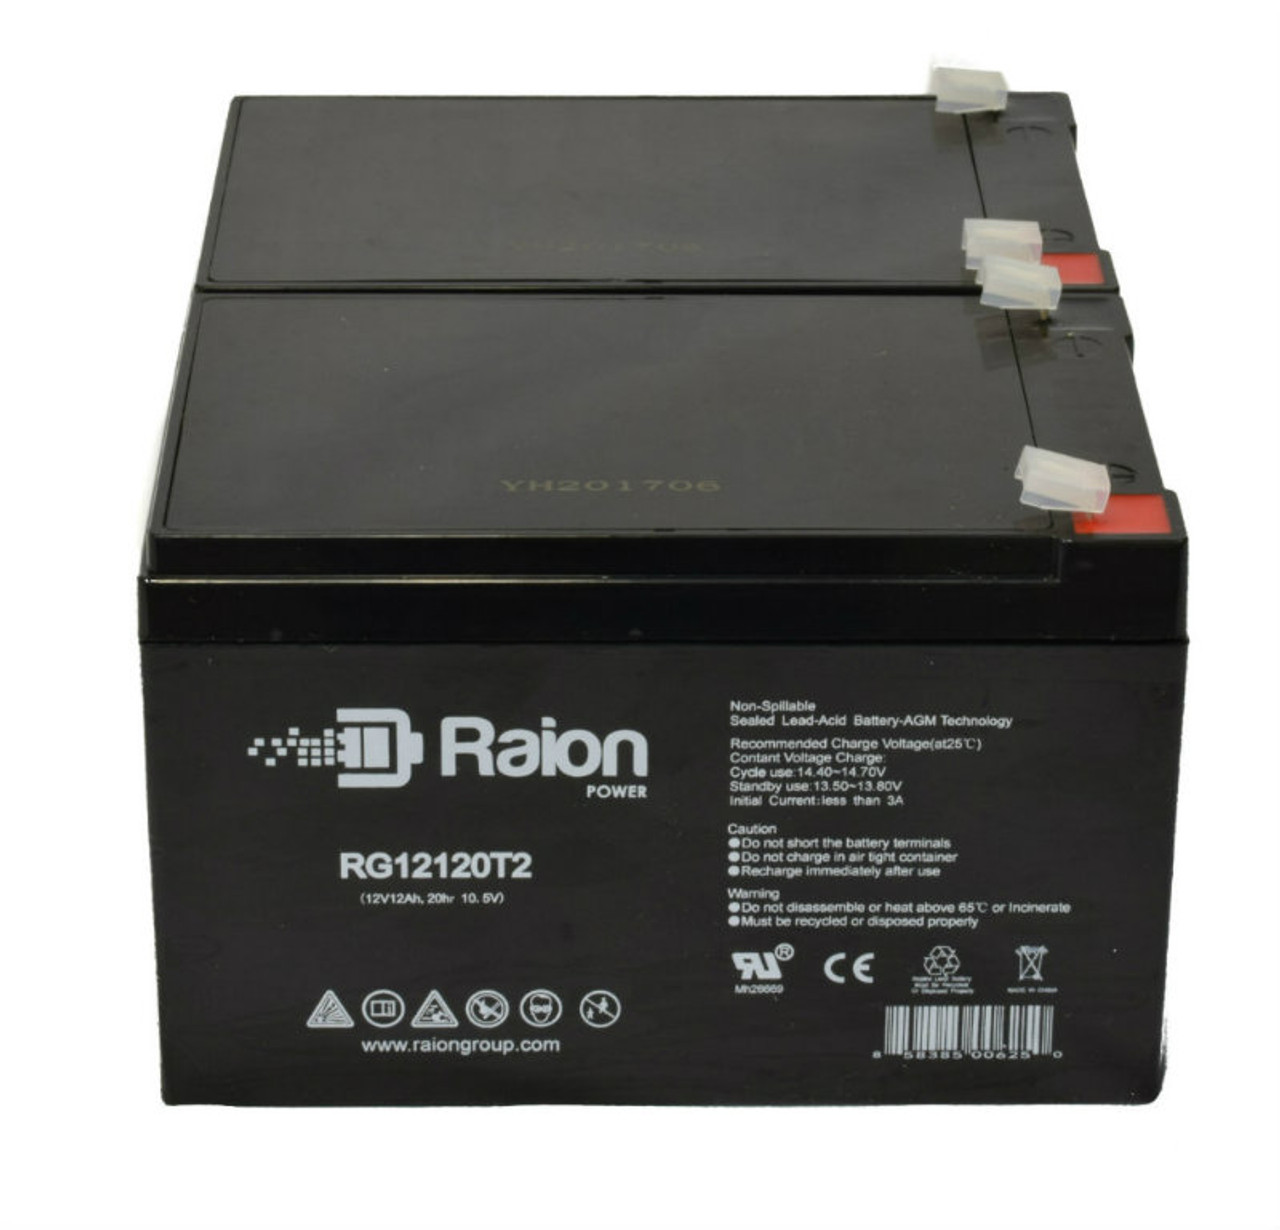 Raion Power RG12120T2 Replacement Battery Set for Golden Technologies Buzzaround XL GB146 RED Mobility Scooter - 2 Pack